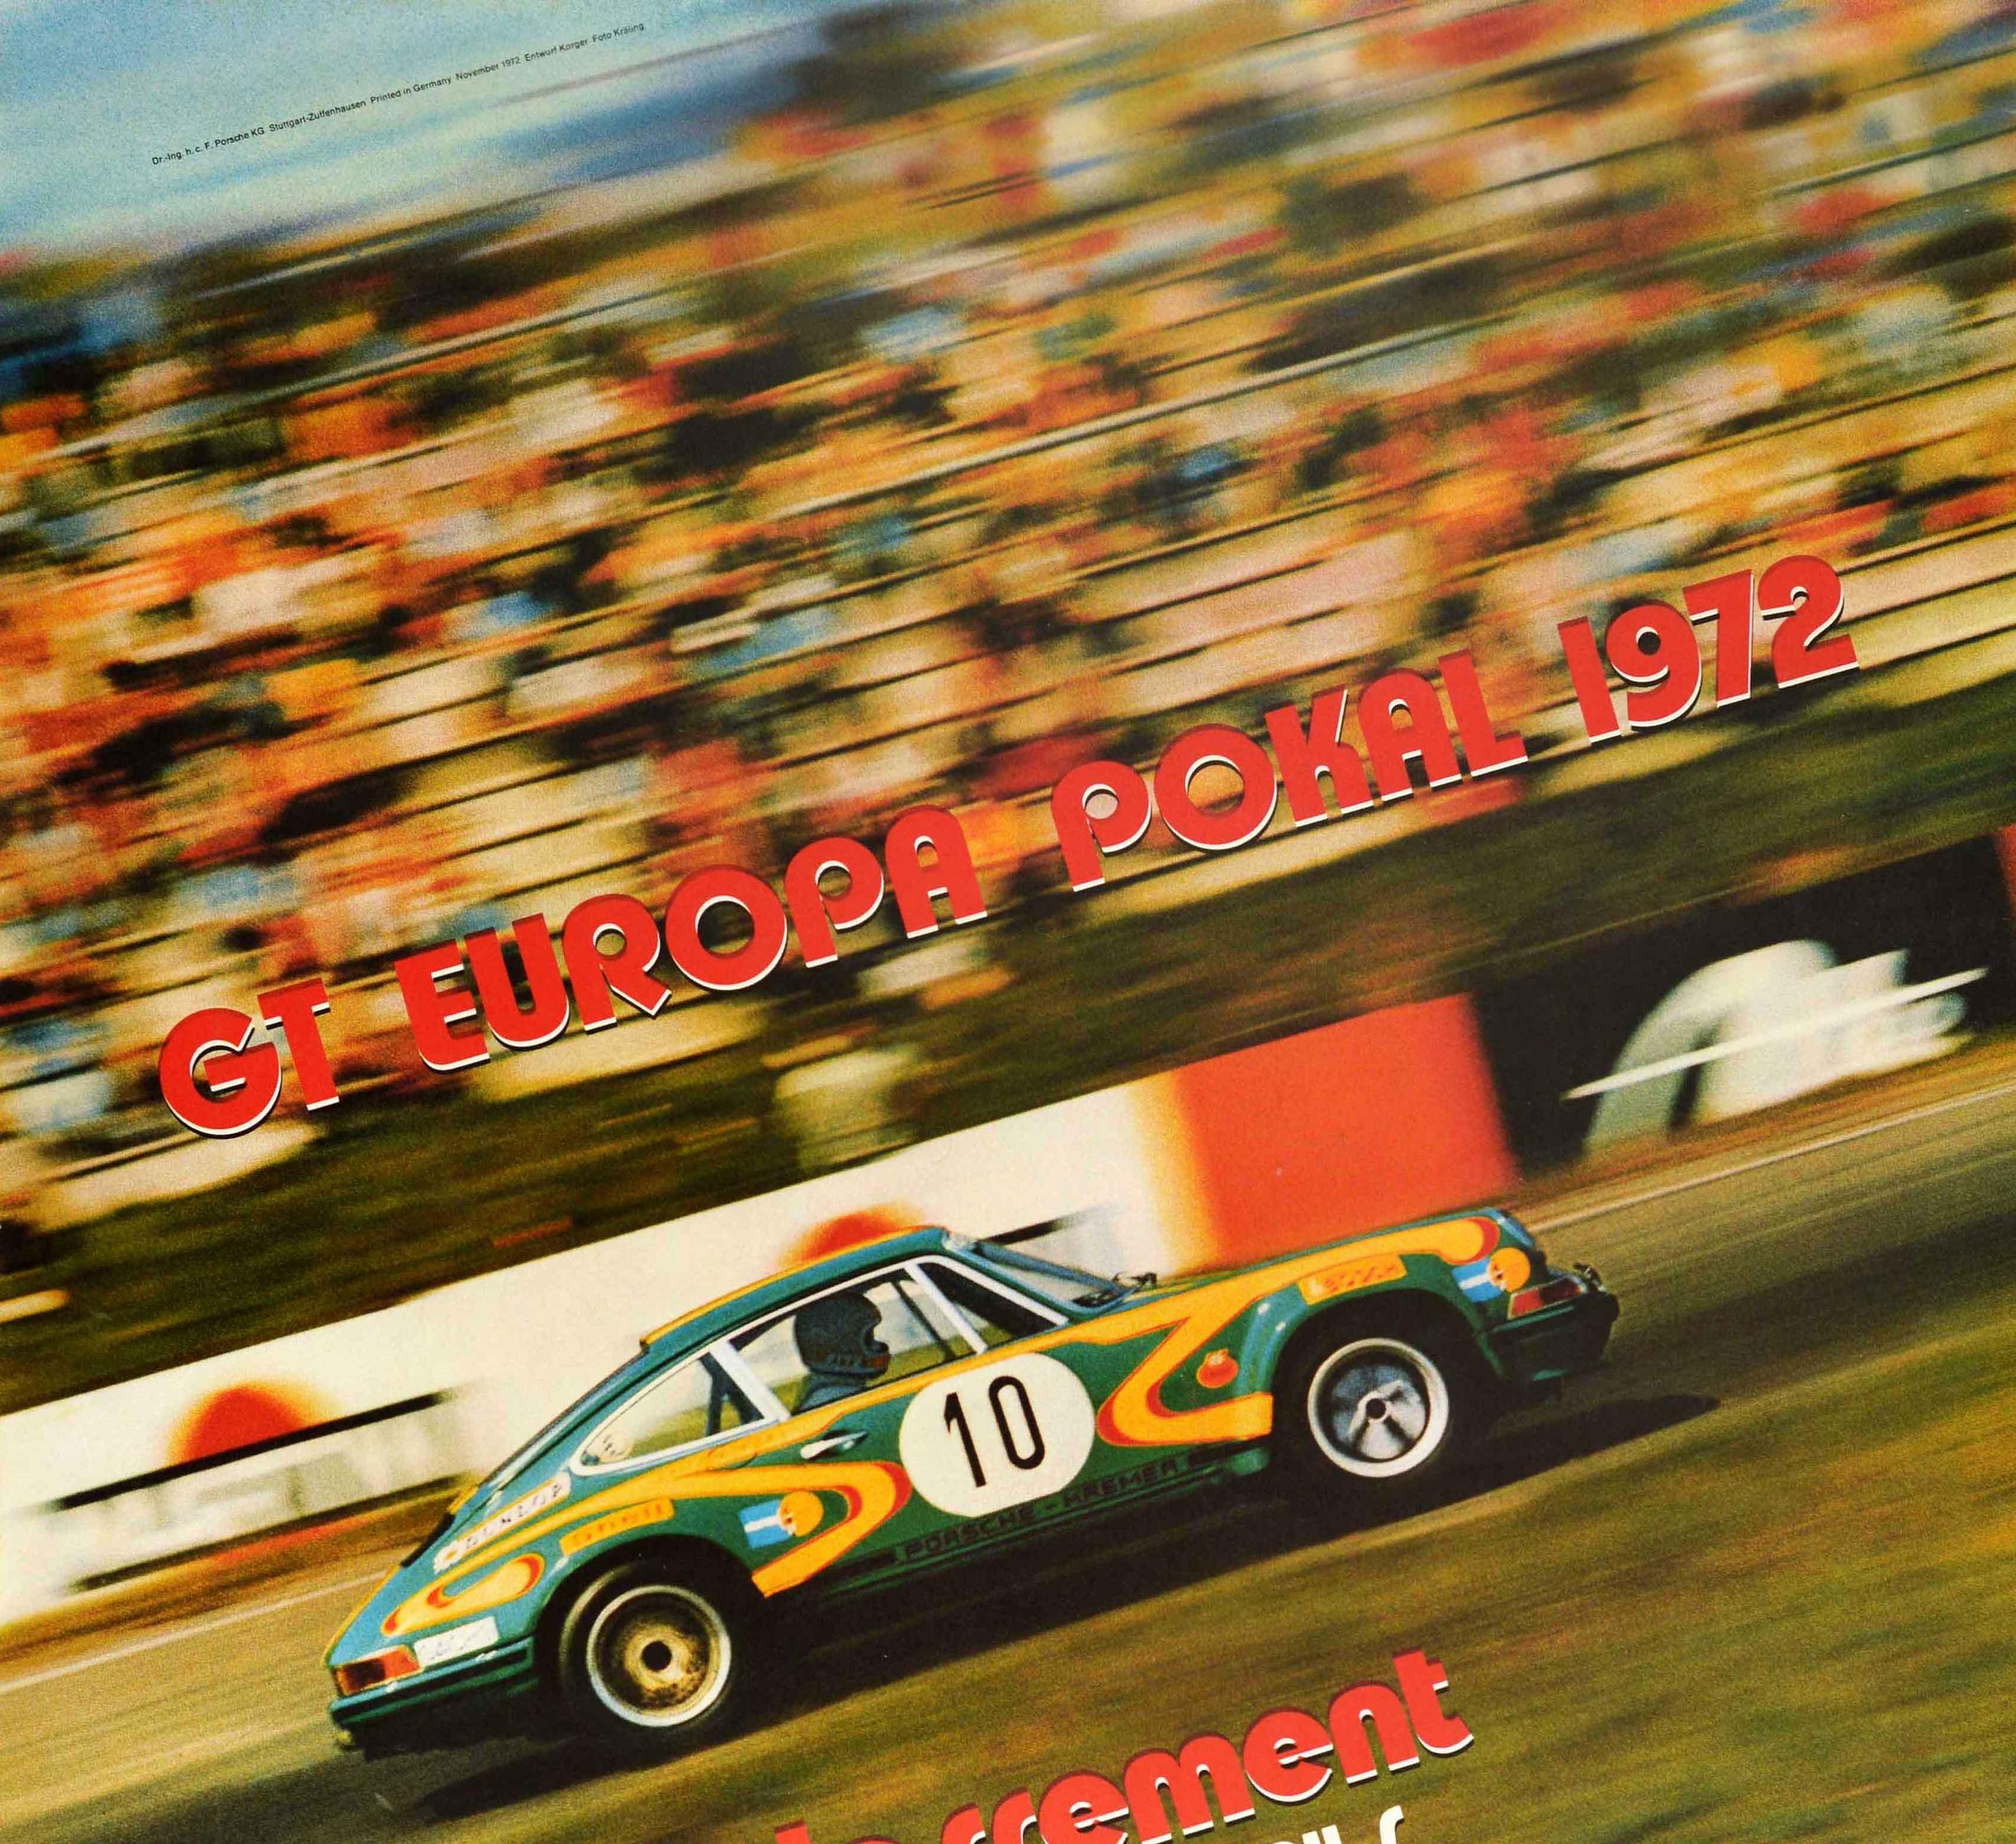 Original vintage motorsport poster for Porsche at the GT Europe Cup / GT Europe Pokal 1972 featuring a dynamic diagonal image of a green Porsche 911S car racing at speed past a crowd of spectators with the stylised title lettering above and overall